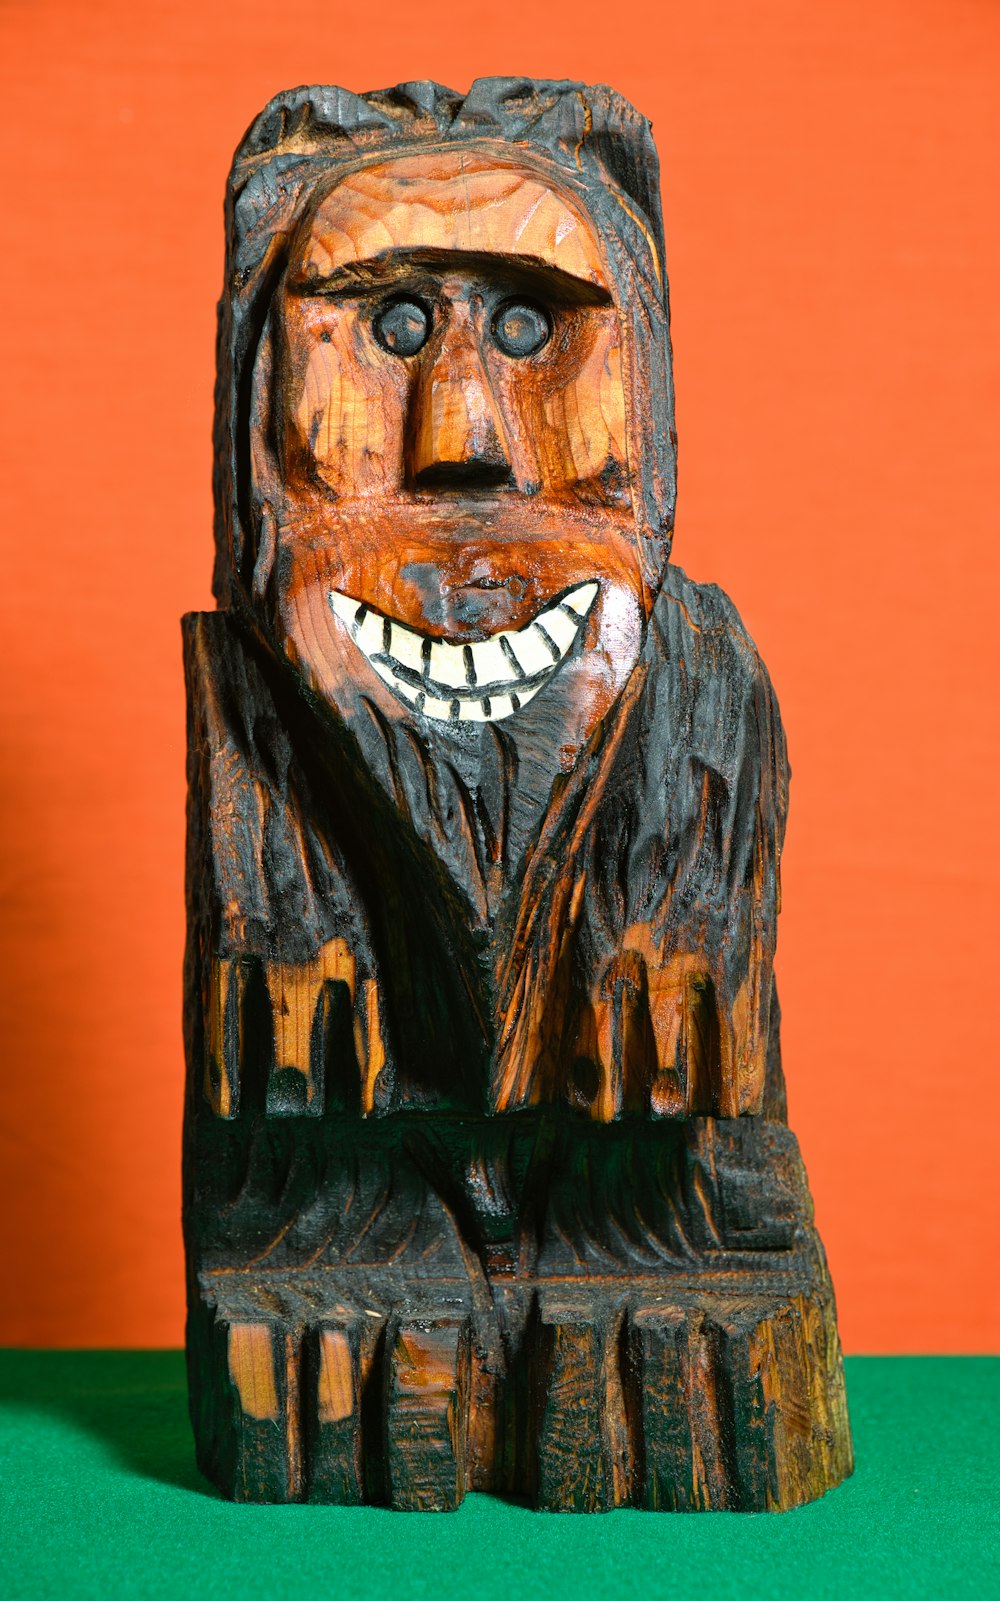 a wooden carving of a man with a smile on his face